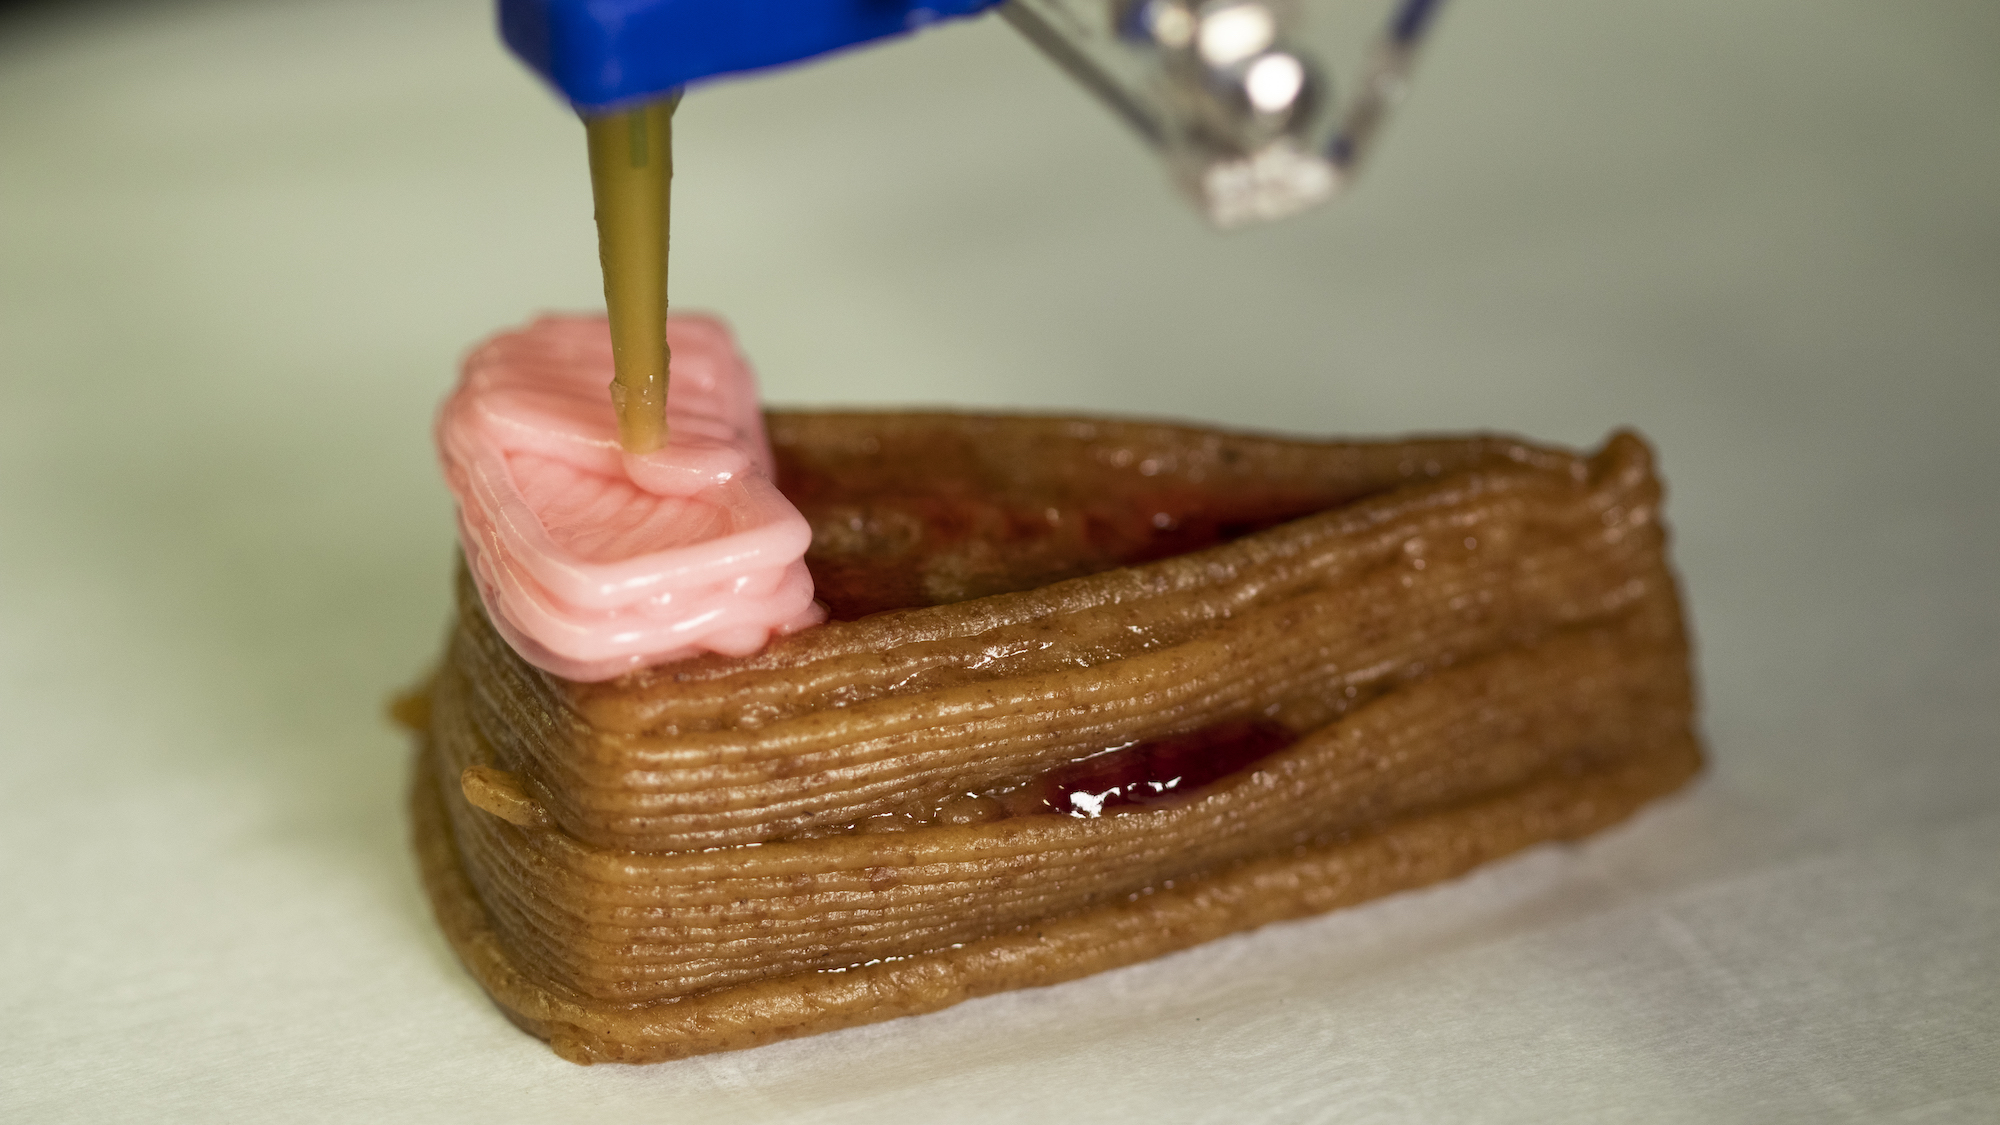 Scientists cooked up a 3D printed cheesecake